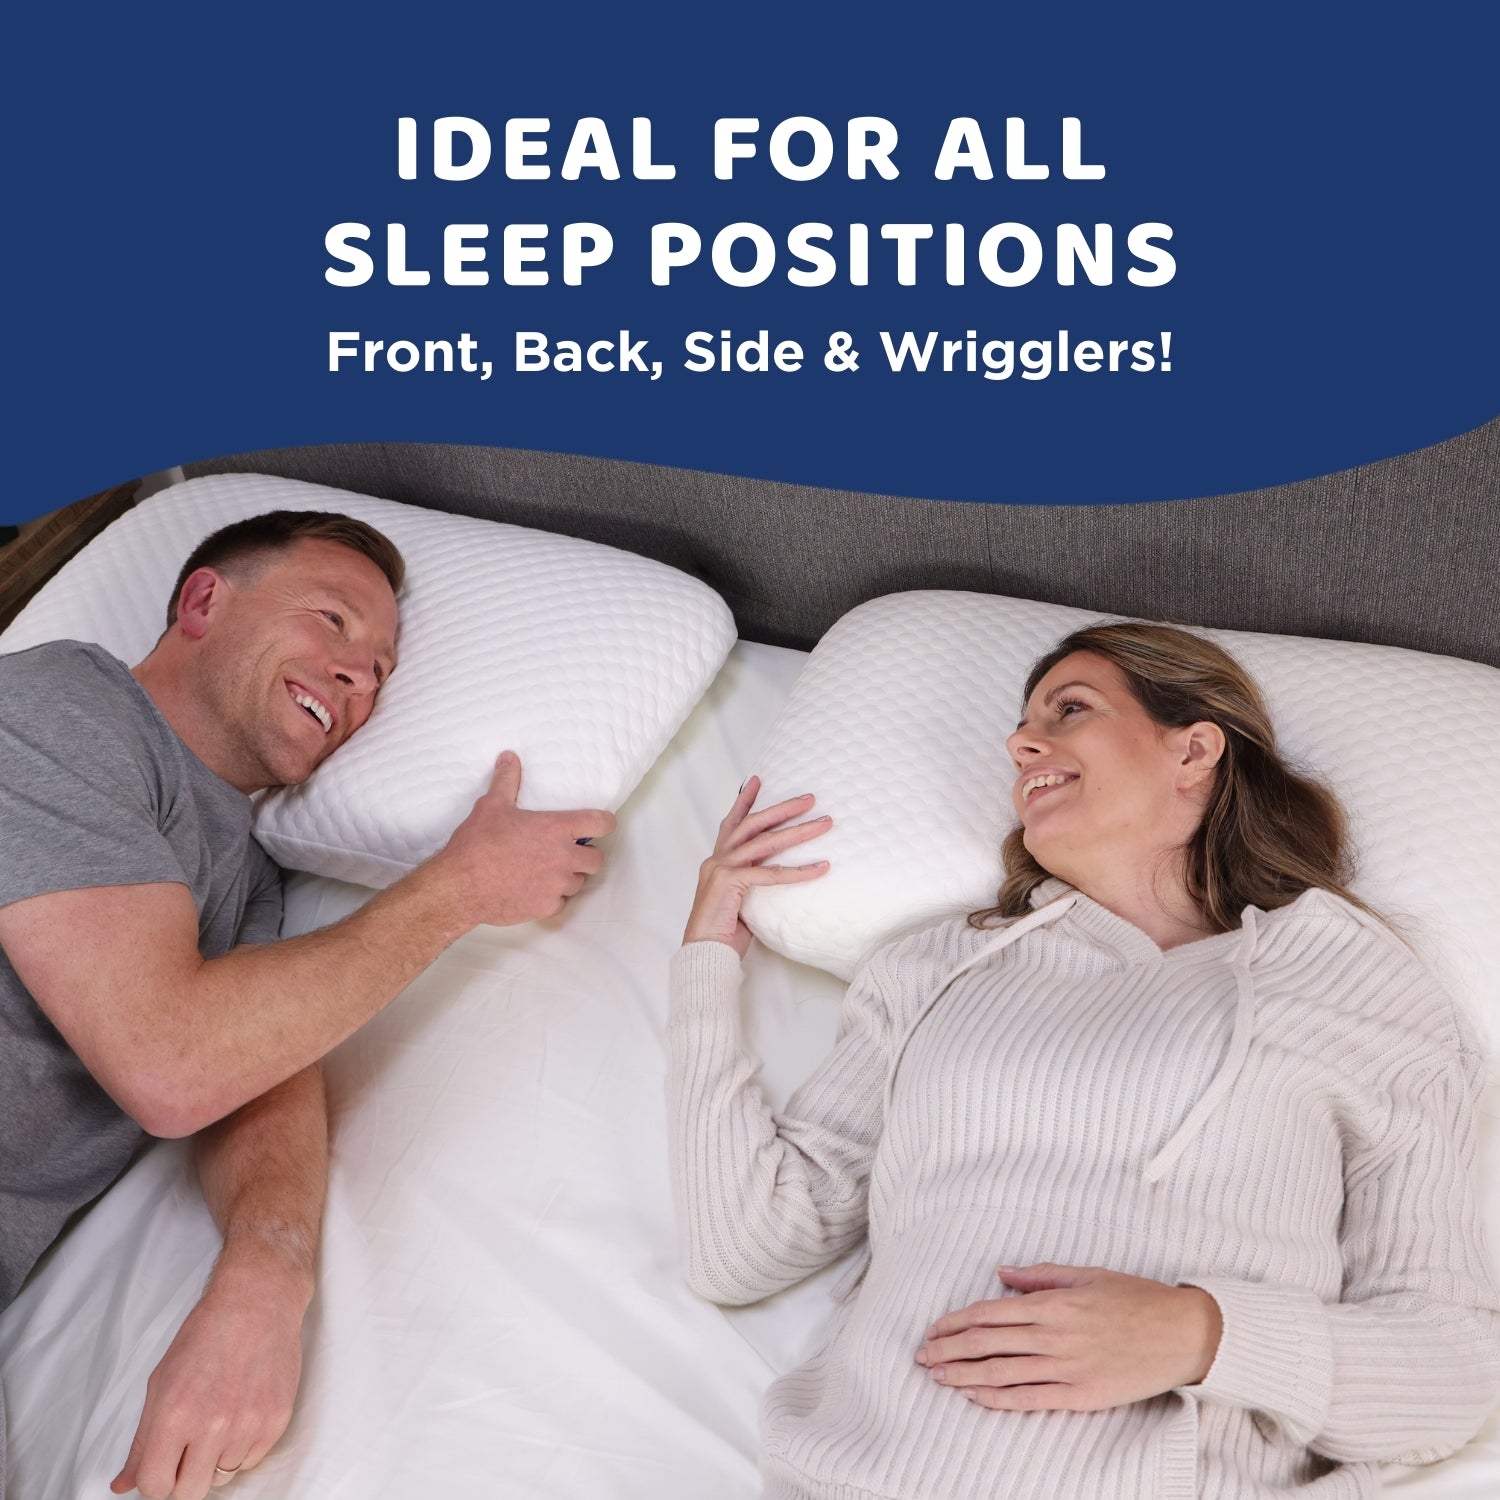 Seriously Comfortable Cool Memory Comfort Side Sleeper Pillow